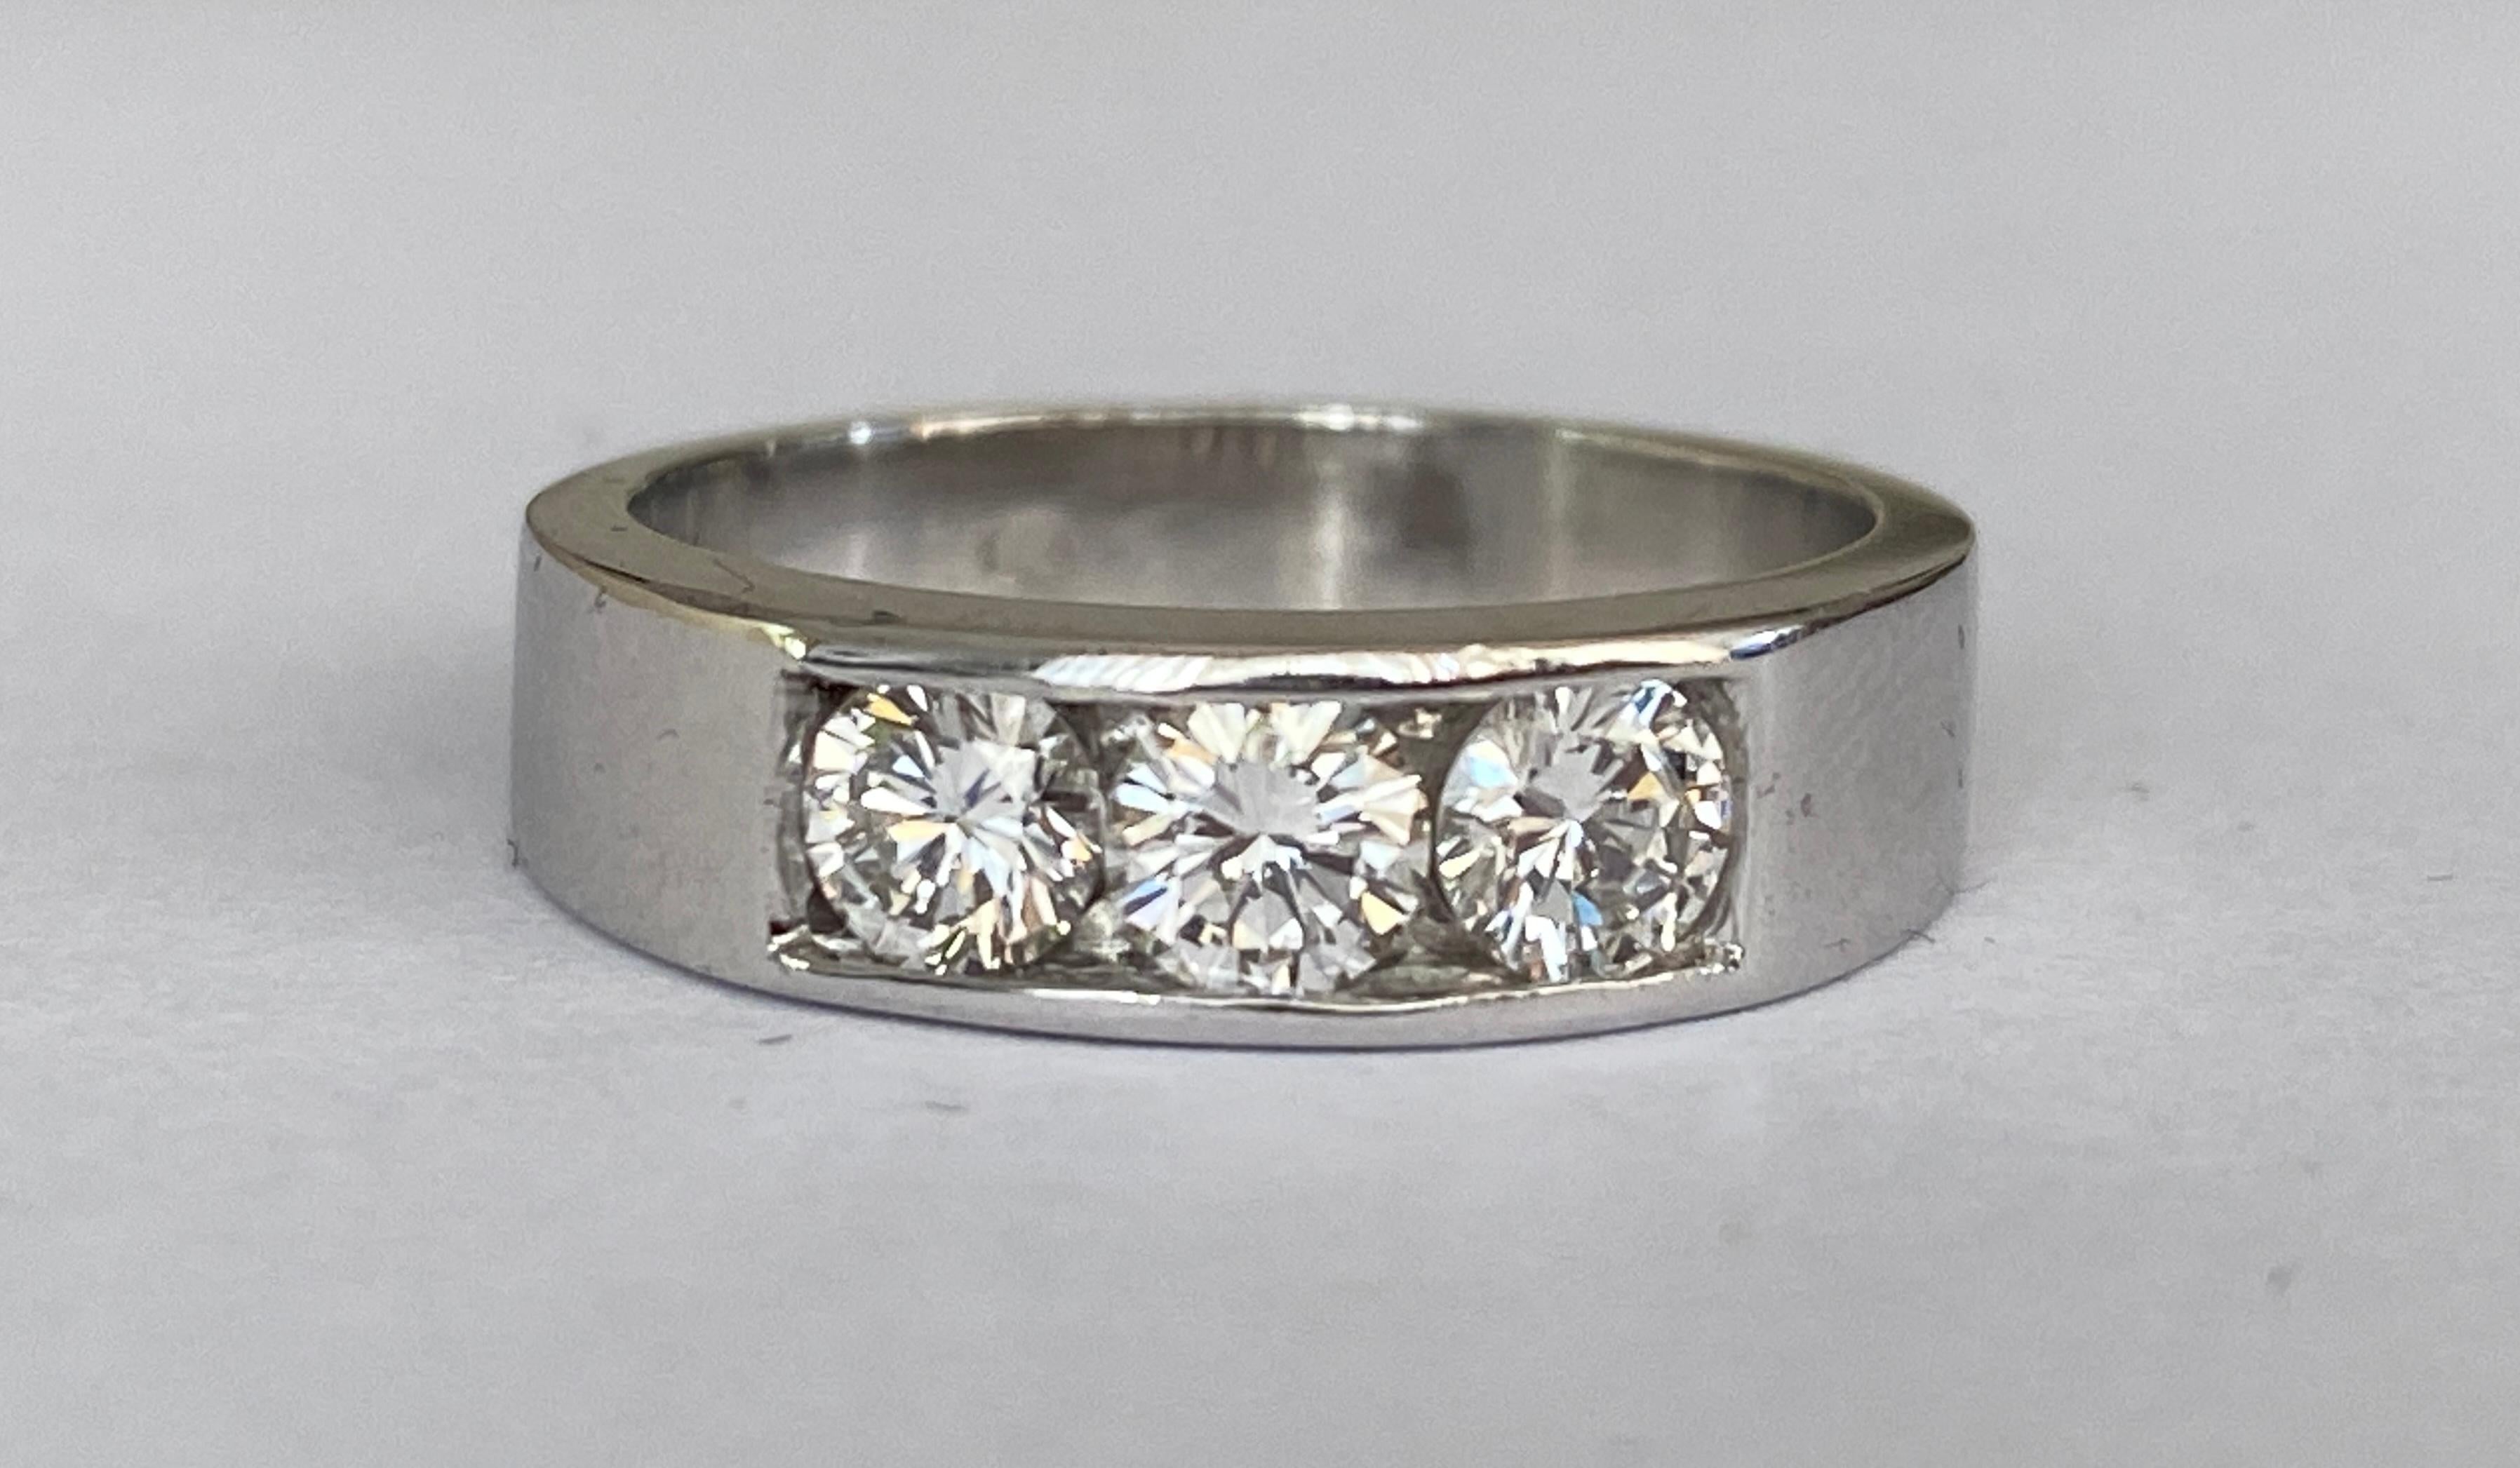 Offered white gold 14 carat Three stones bandring decorated with 3 pieces of brilliant cut diamonds of approx. 0.72 ct in total of quality G/VVS.

Gold content: 585 (hallmarked)
Weight: 6.85 grams
Height of the ring : 6mm
Ring size: 17.00